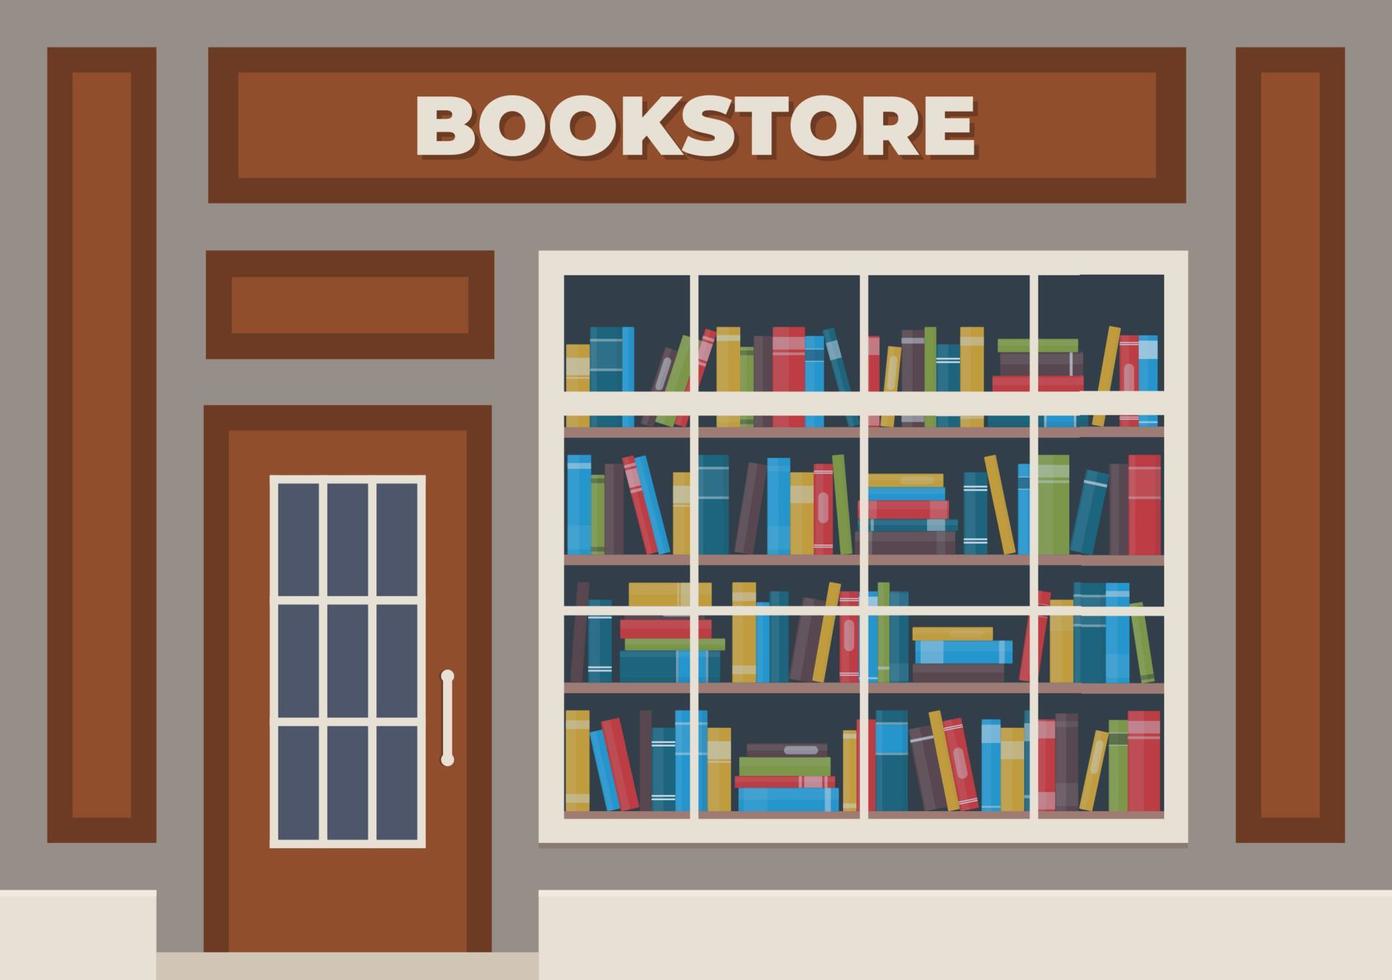 A bookstore with a sign over the entrance. Books in the shop window on the shelves. Street store. Vector illustration, flat style.